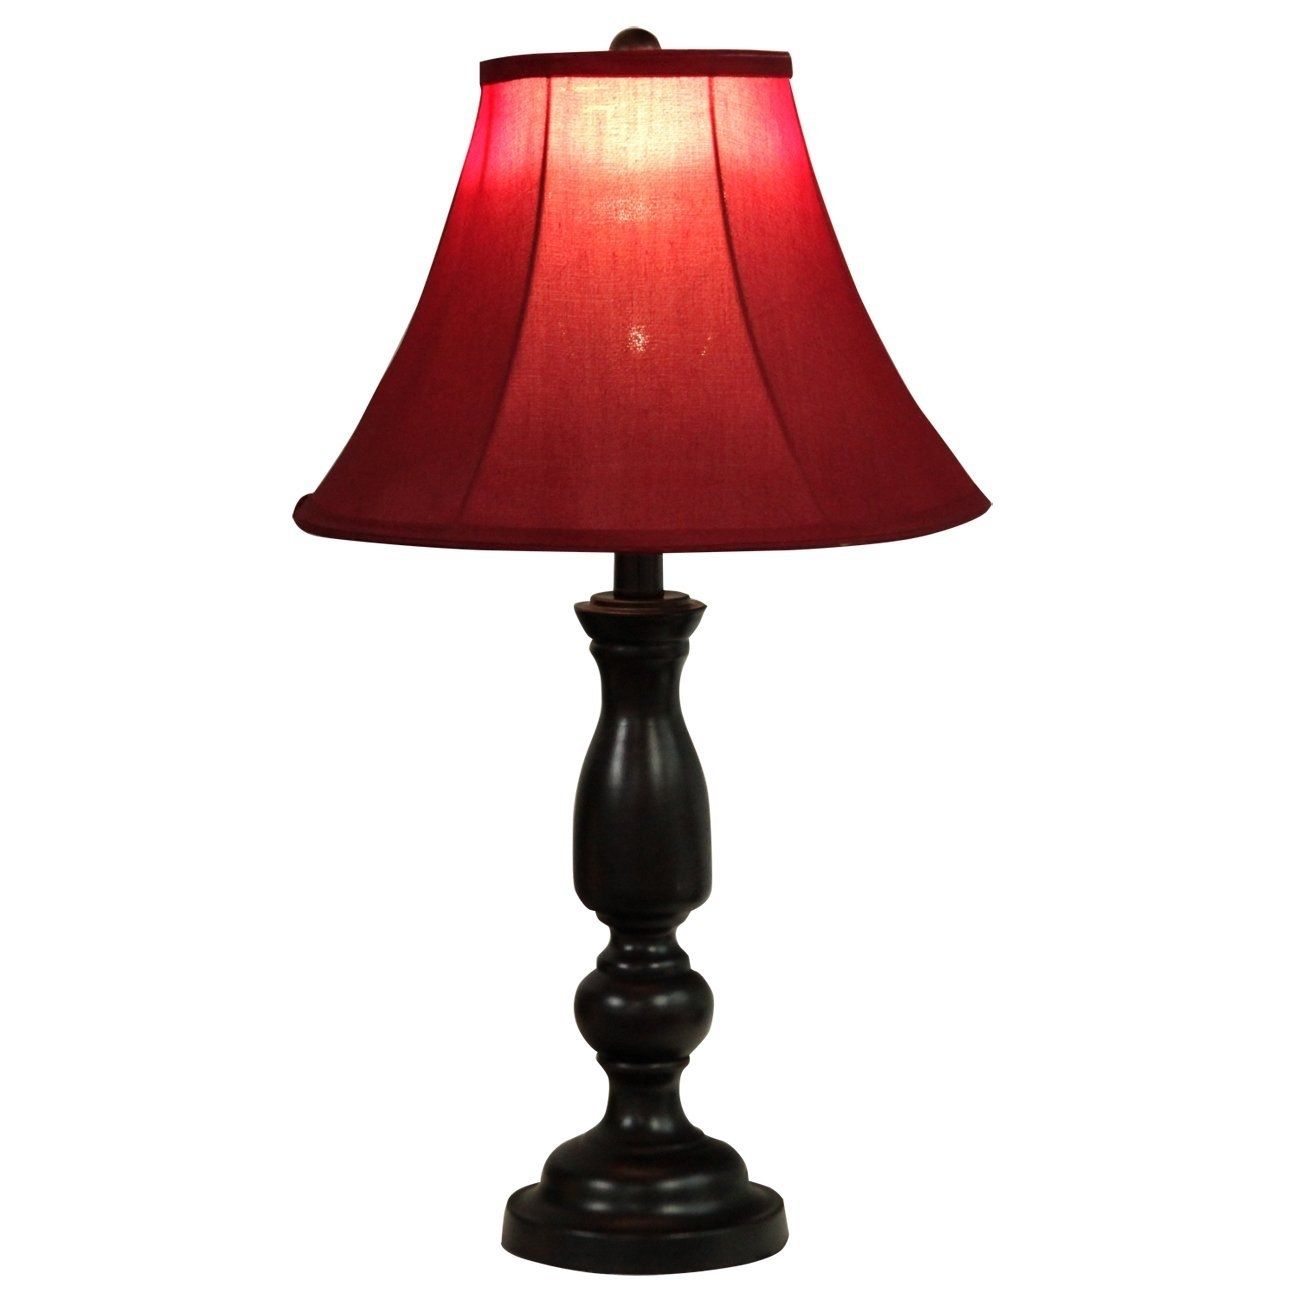 Vintage Red Table Lamp For Living Room Traditional Table Lamp With Throughout Red Living Room Table Lamps (View 14 of 15)